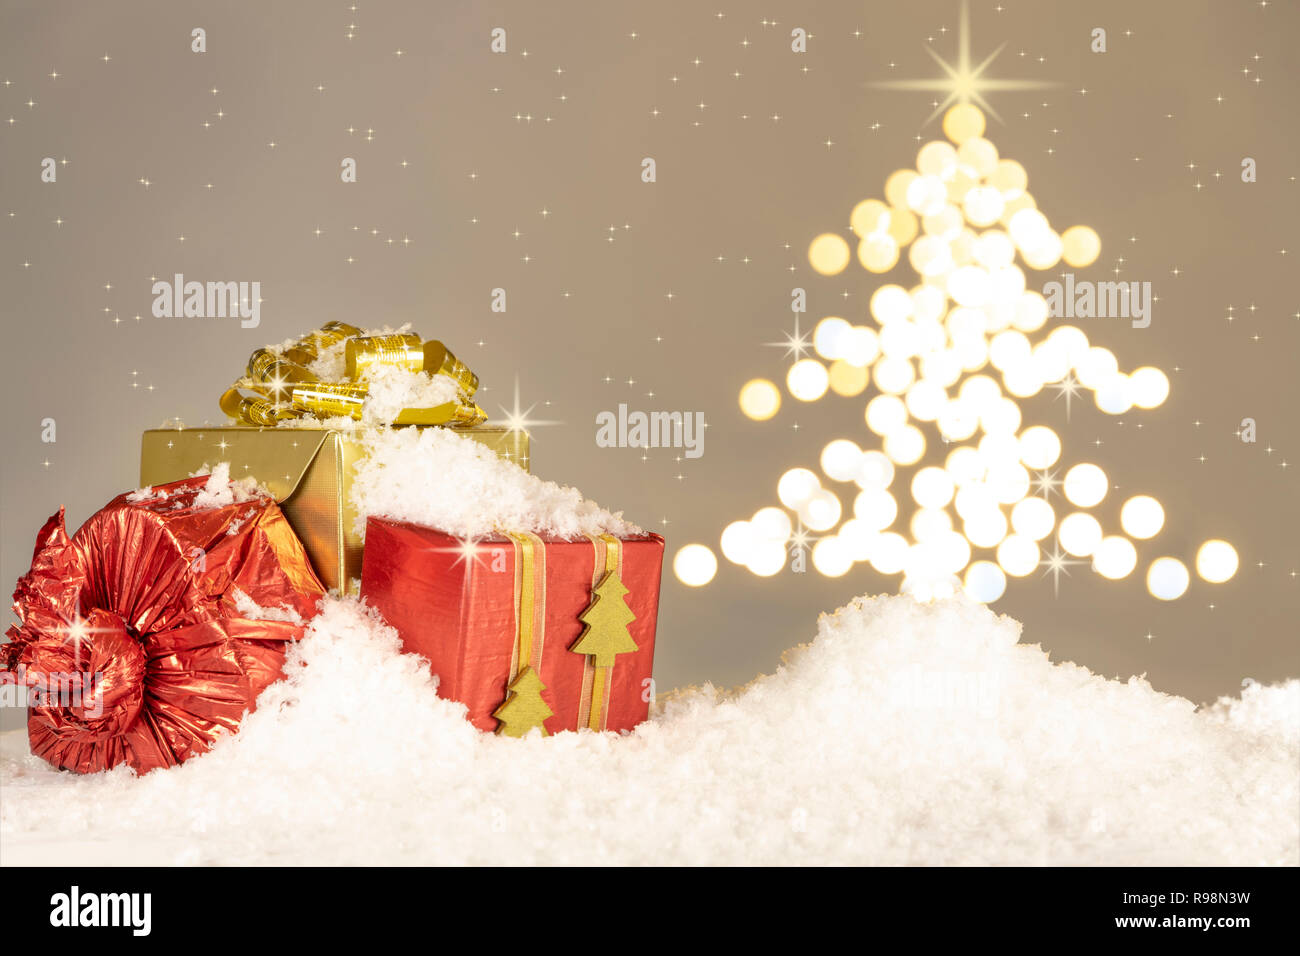 Christmas theme card with lights shaped tree and snow Stock Photo